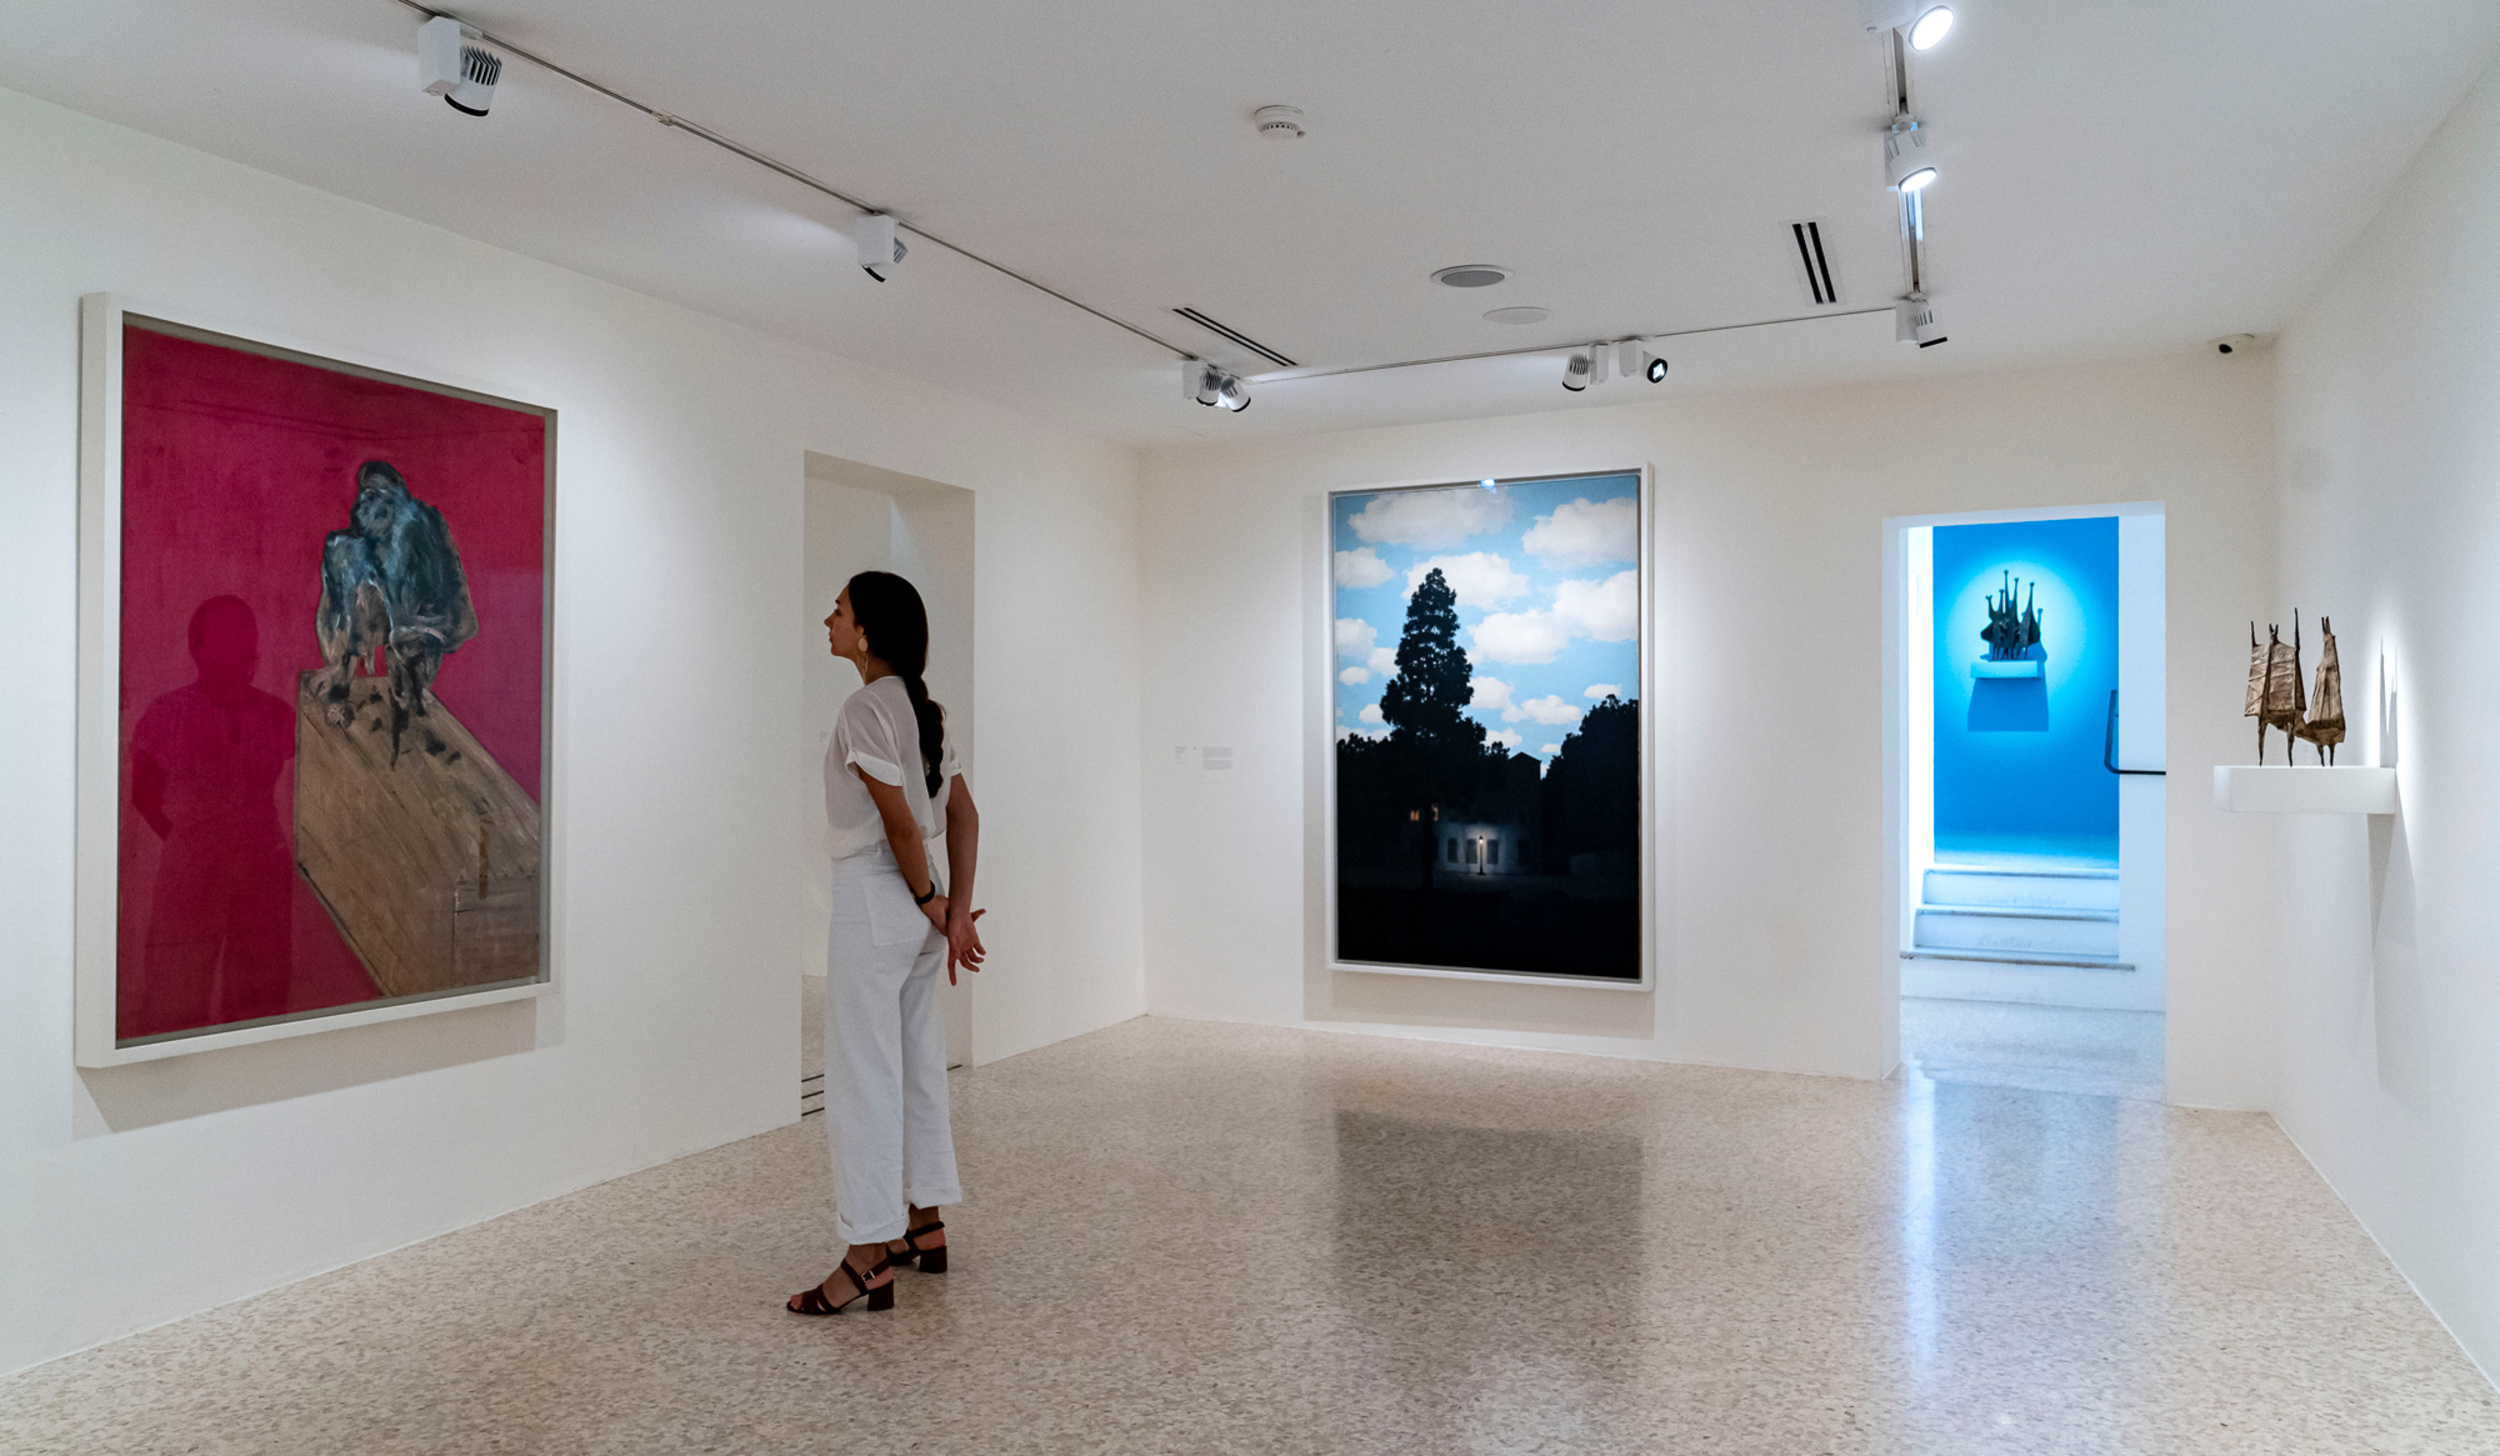 <p>This private collection was once the home of Peggy Guggenheim, who played a big role in the careers of Jackson Pollock, Max Ernst, and Alberto Giacometti. Now, you'll find the walls lined with Picasso, Dali, Mondrian, and Malevich. Plus, Joseph Cornell! </p><p>You may also like: <a href='https://www.yardbarker.com/lifestyle/articles/the_23_best_european_cities_during_the_spring_022624/s1__39854074'>The 23 best European cities during the spring</a></p>